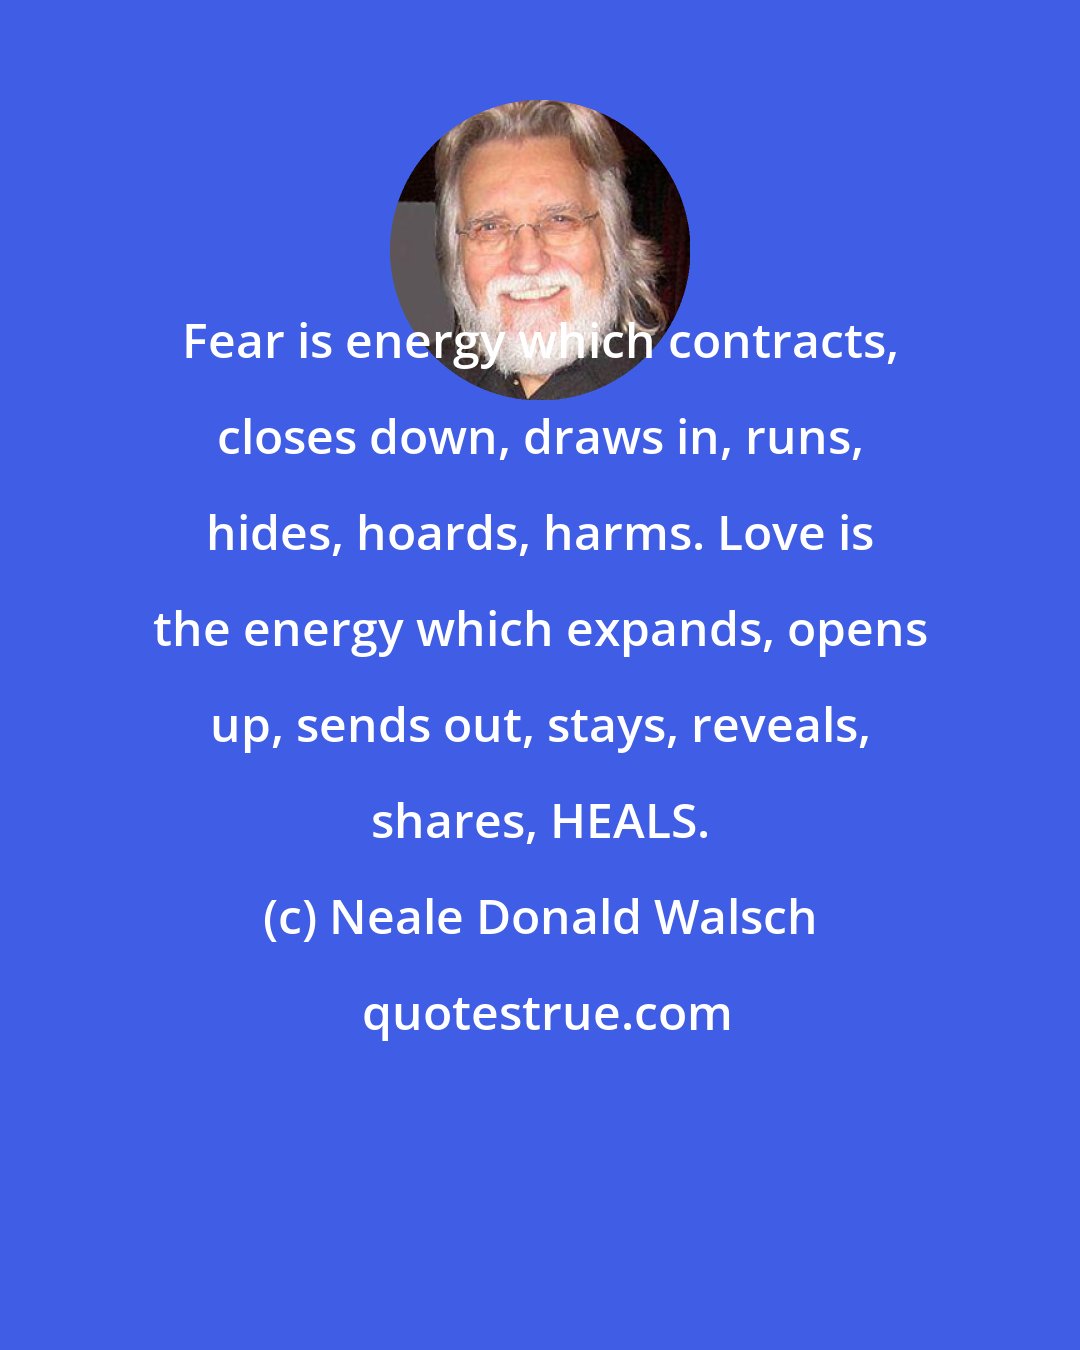 Neale Donald Walsch: Fear is energy which contracts, closes down, draws in, runs, hides, hoards, harms. Love is the energy which expands, opens up, sends out, stays, reveals, shares, HEALS.